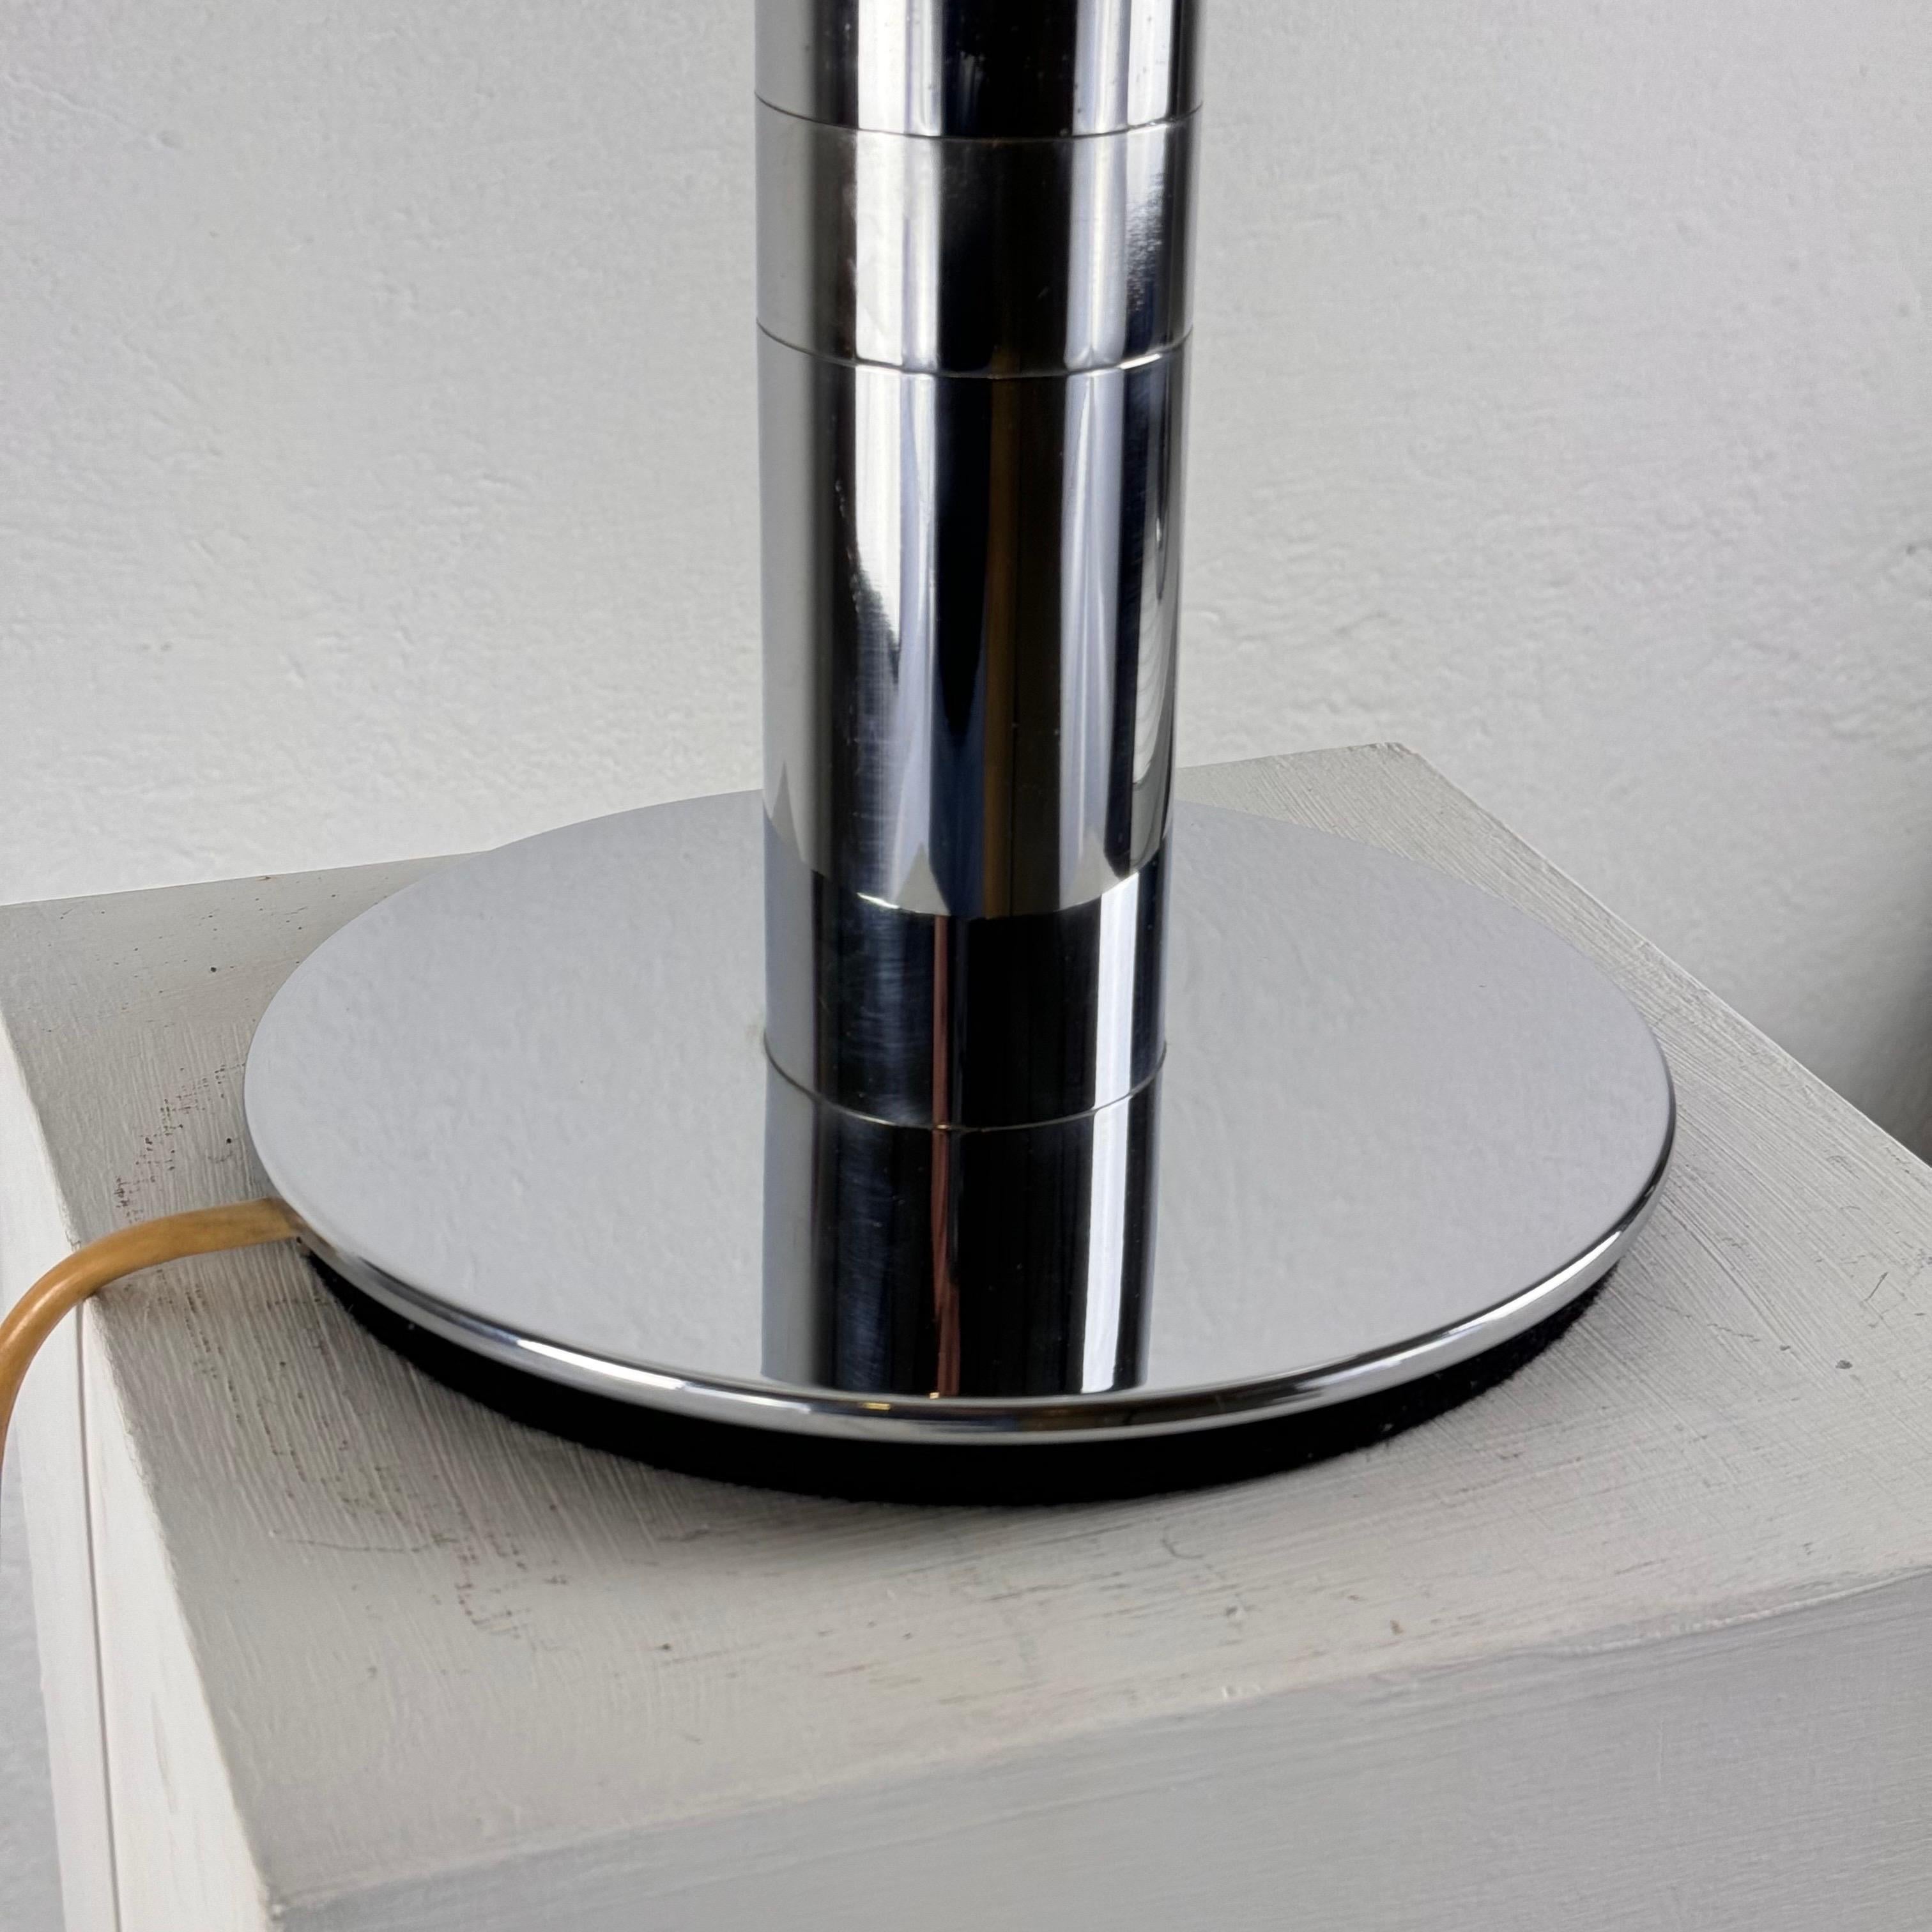 Italian AM/AS Table Lamp by Franco Albini and Franca Helg for Sirrah, 1967 For Sale